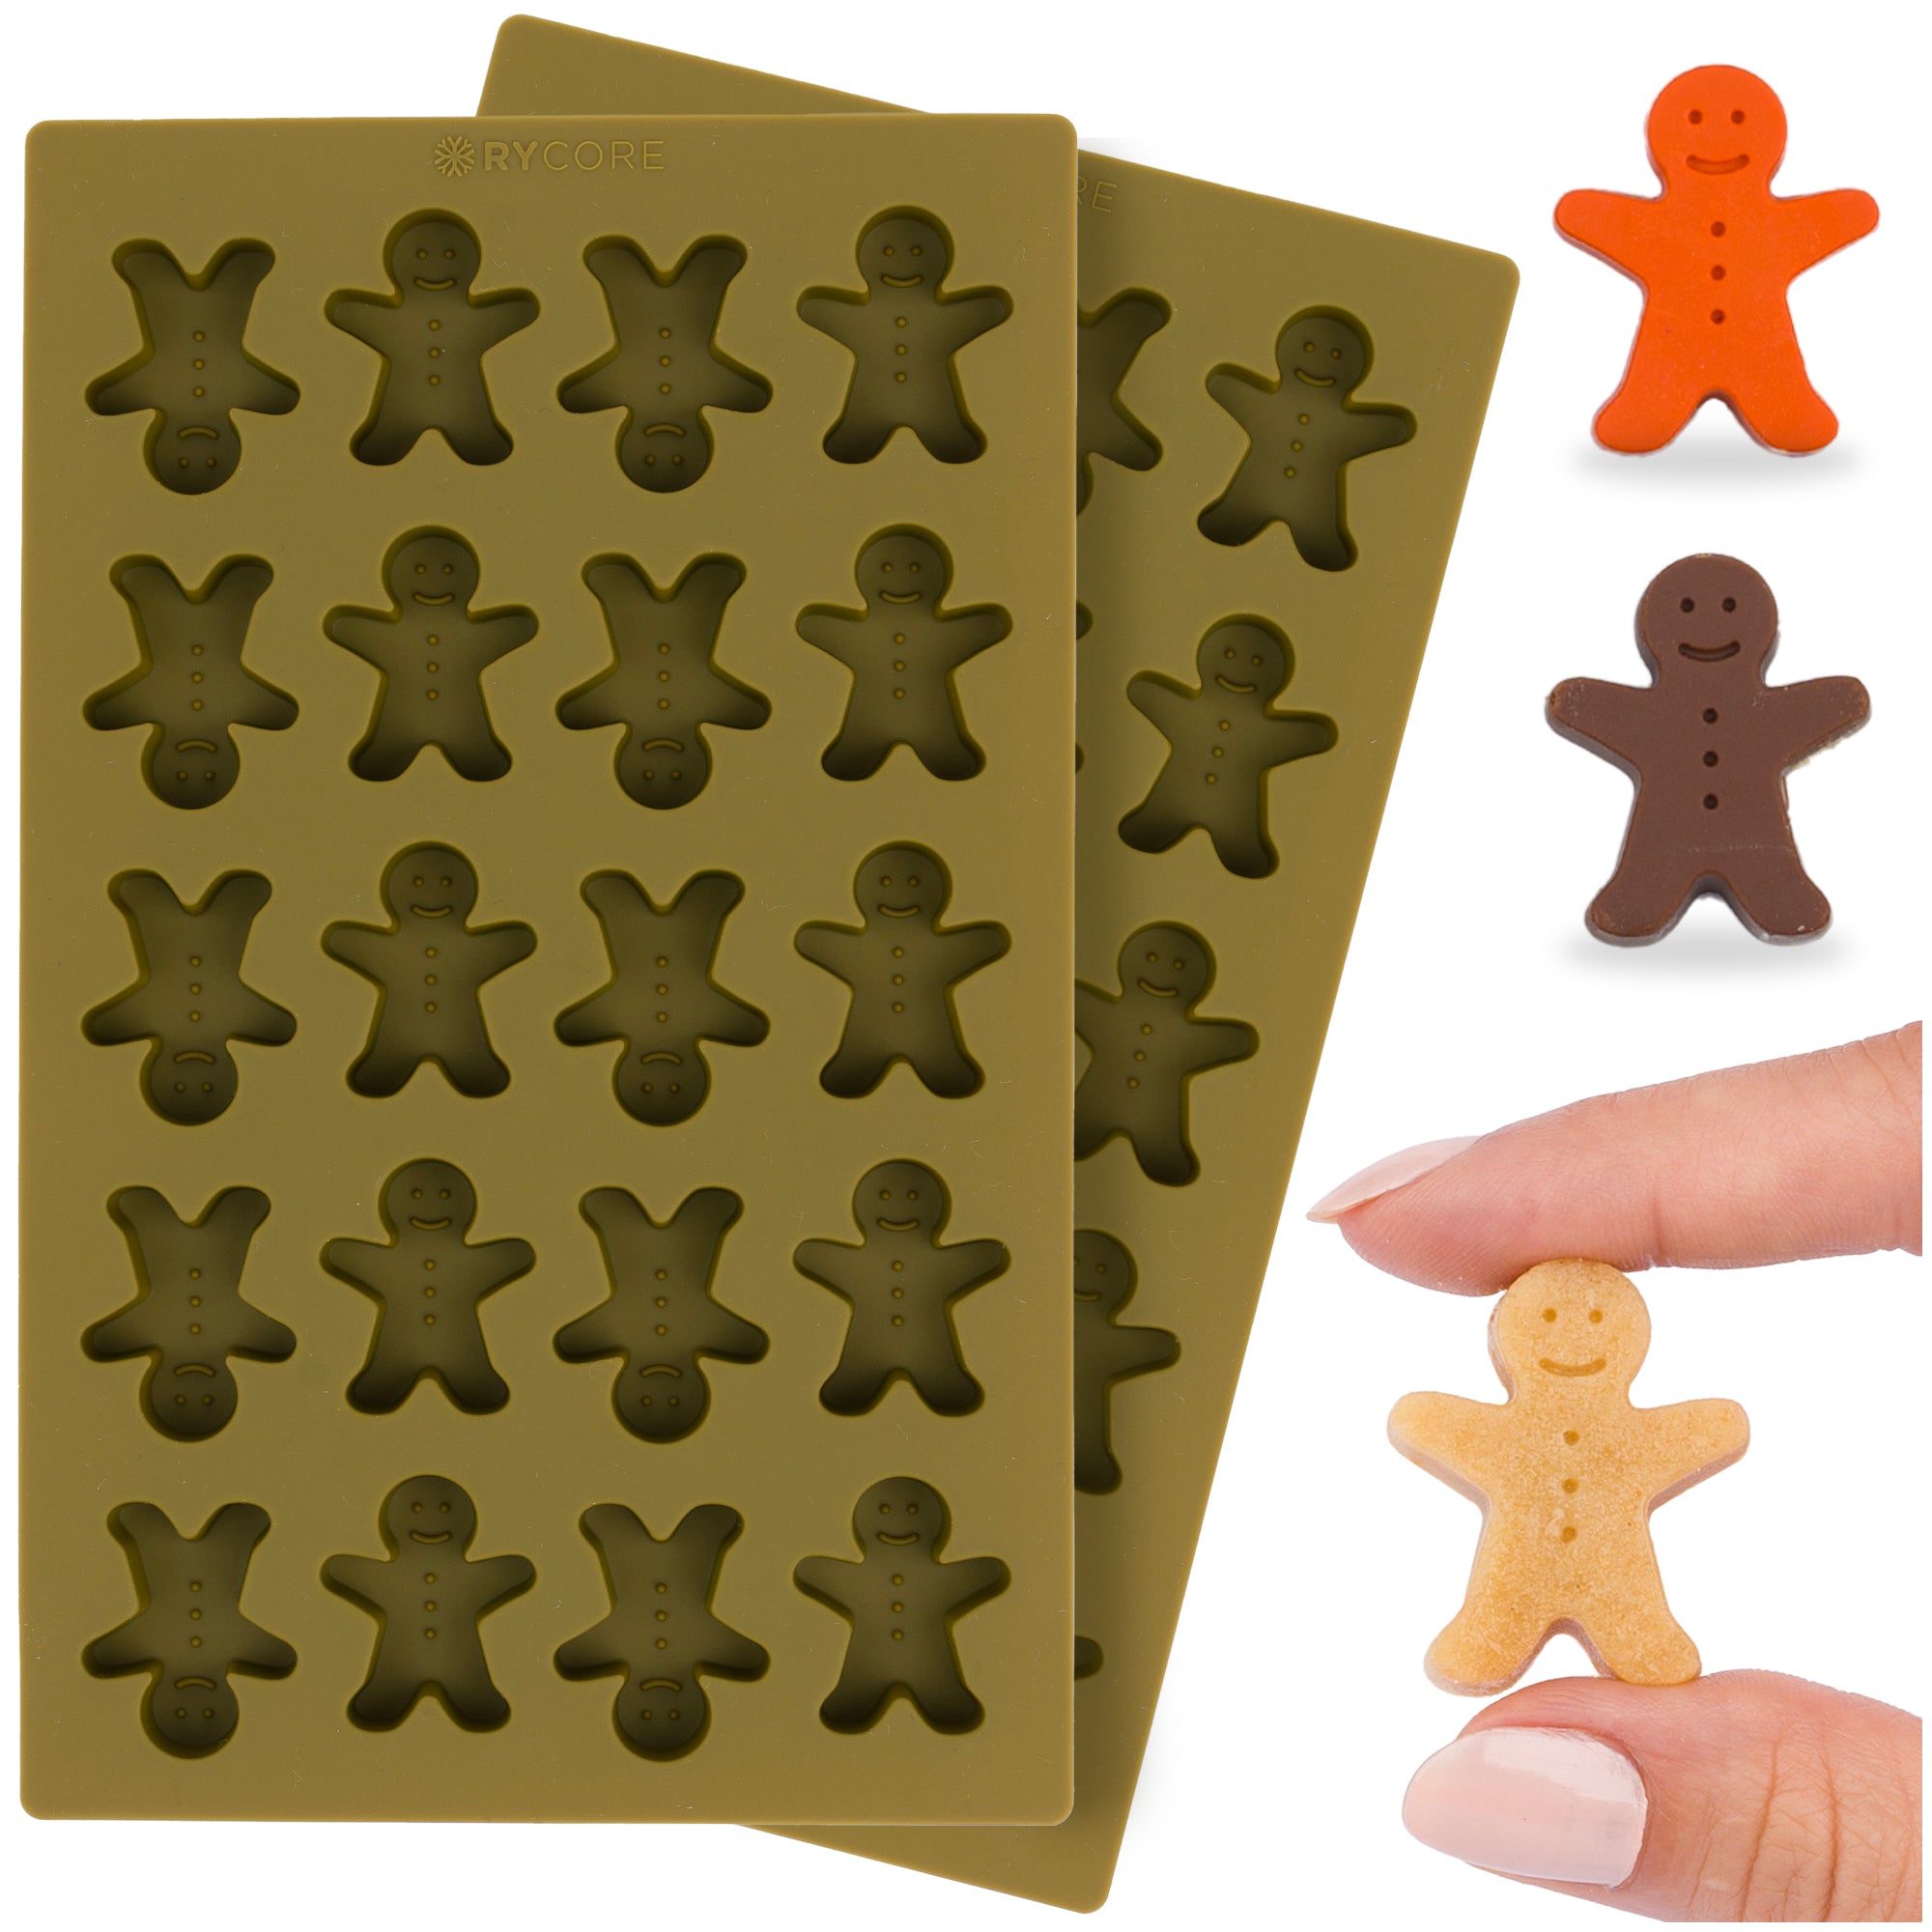 Chocolate Candy Molds, 77 Gingerbread Man Shape Silicone Molds